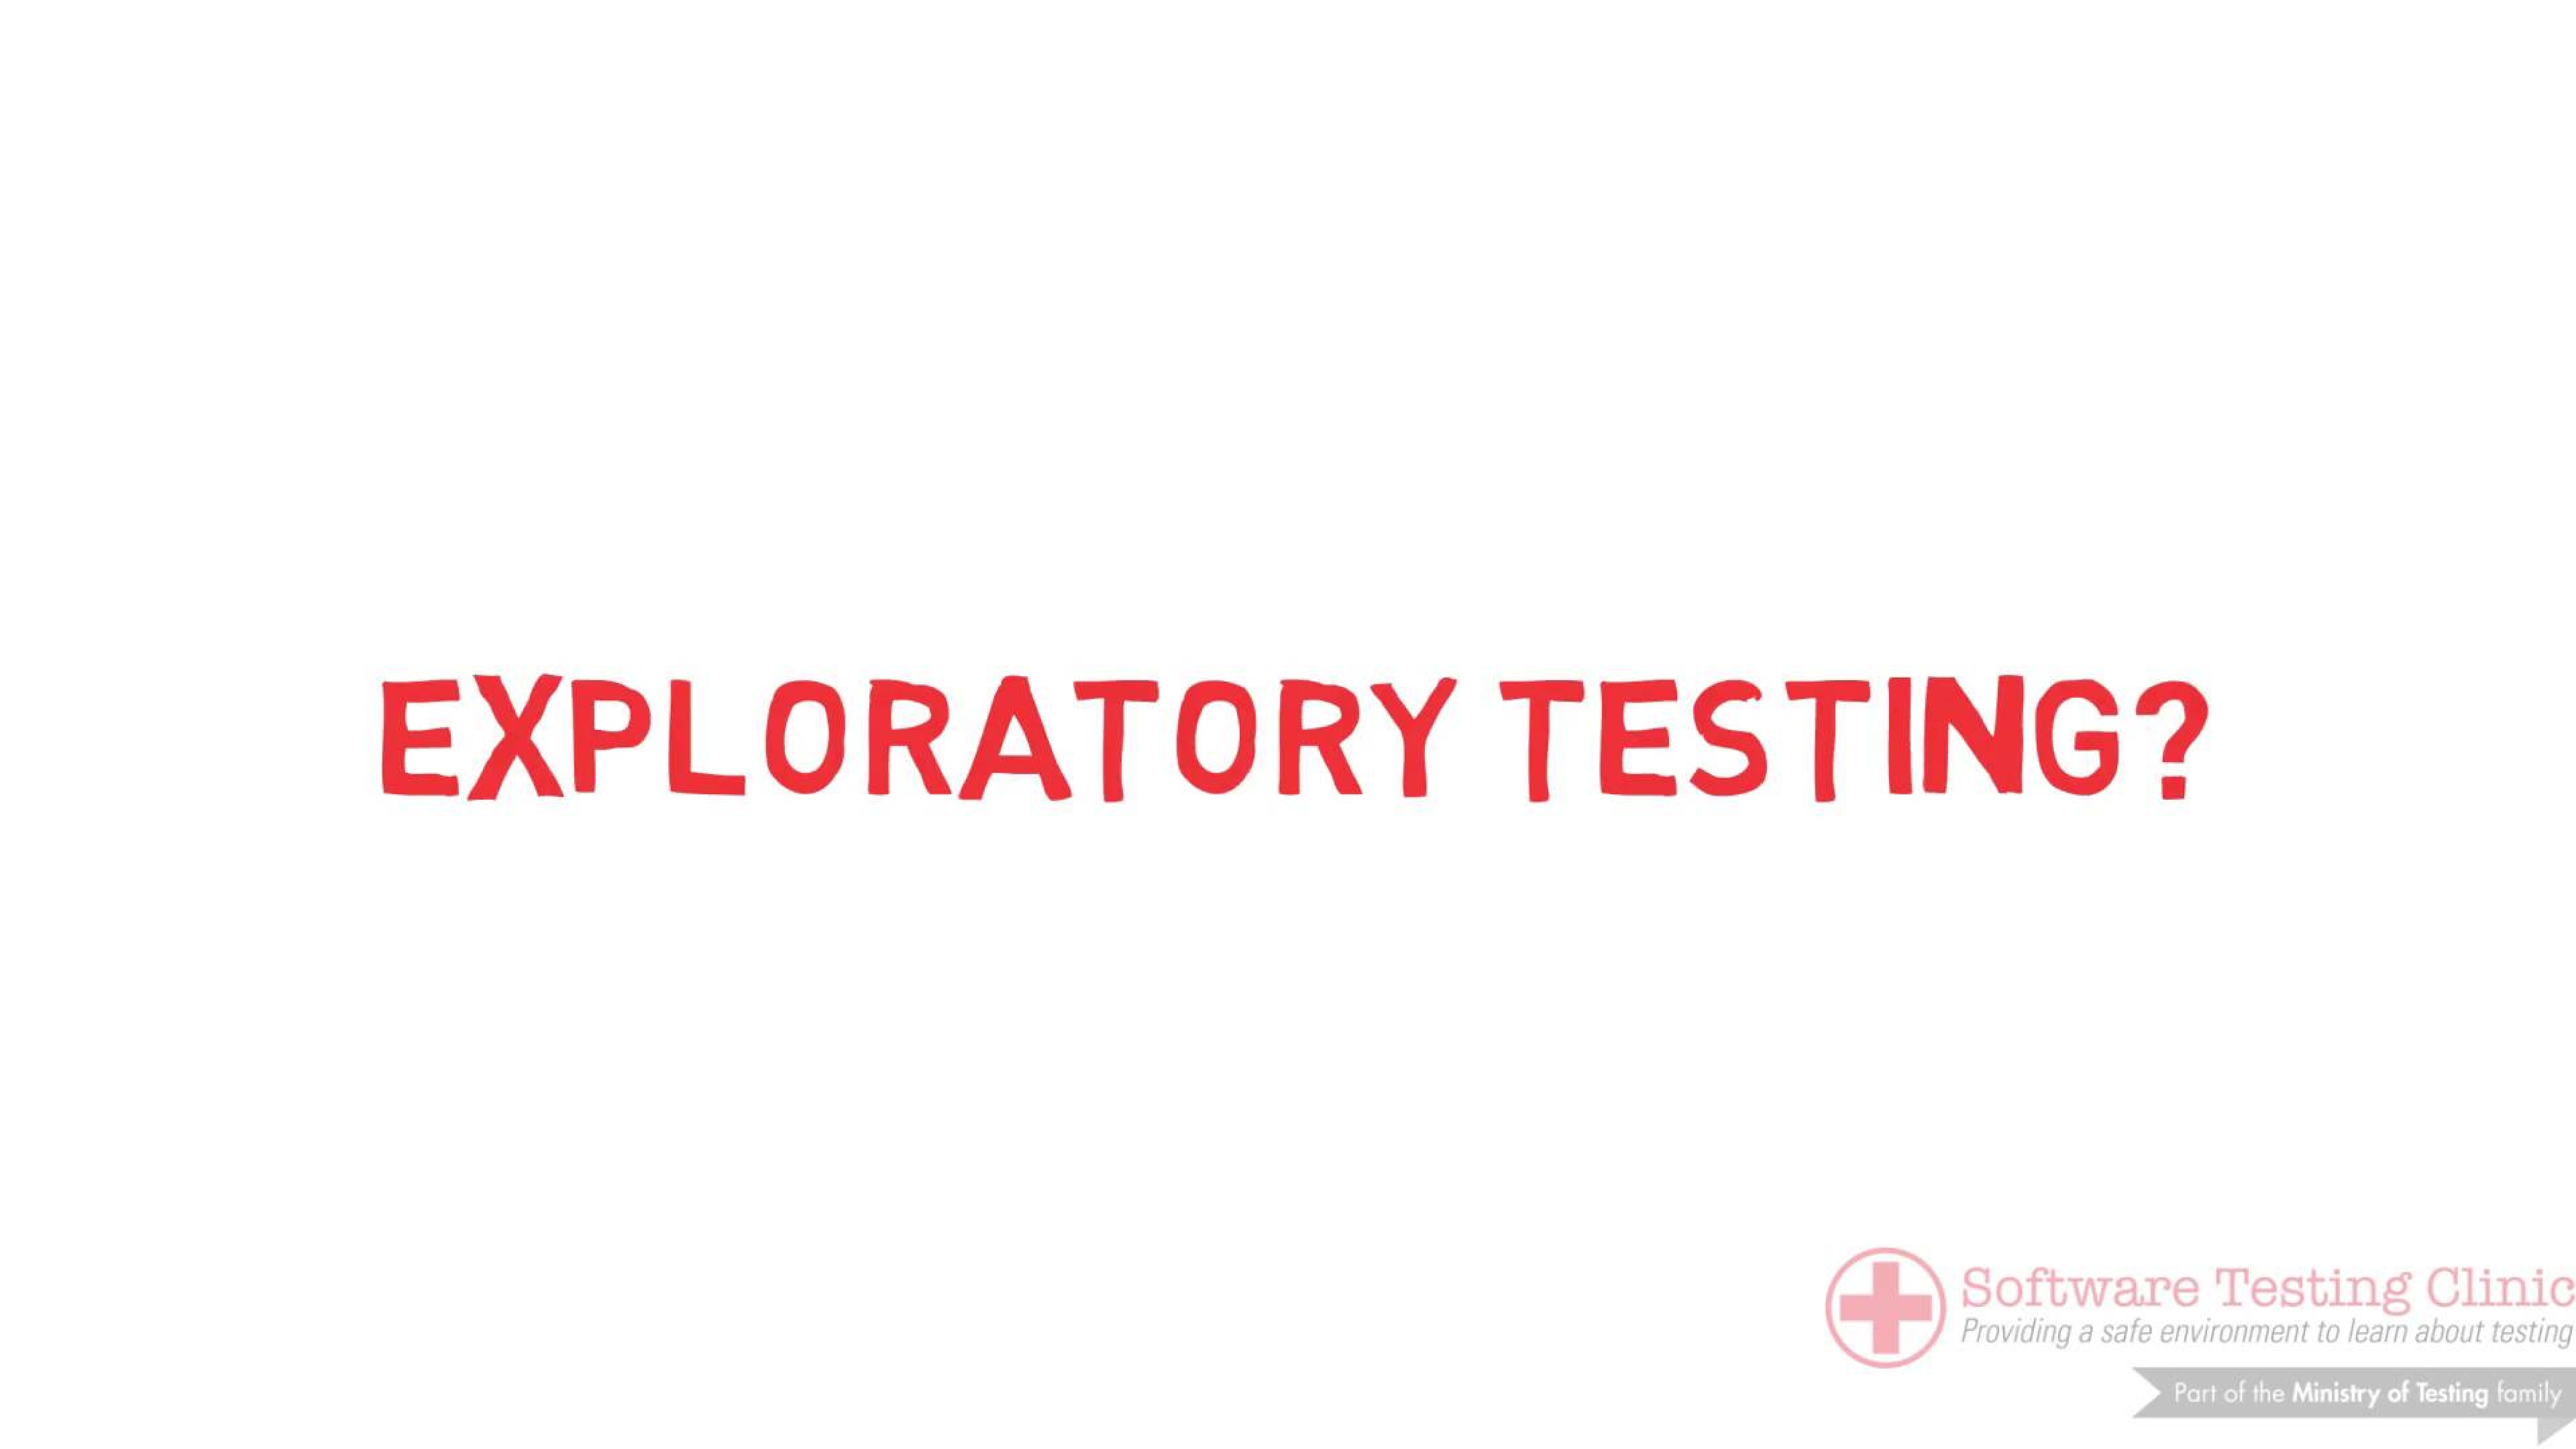 99 Second Introduction to Exploratory Testing